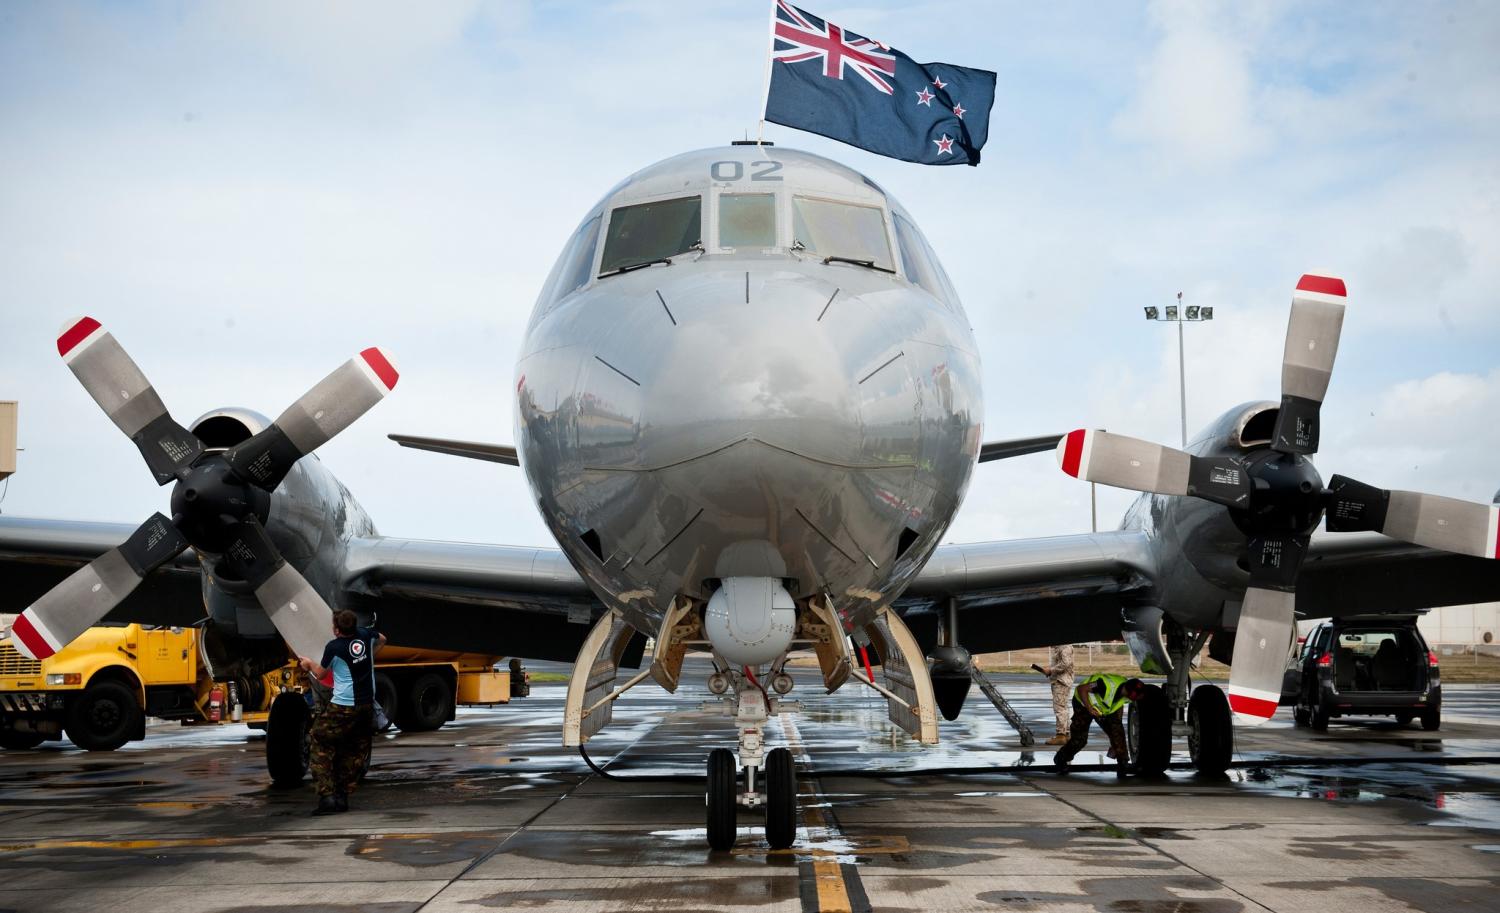  Royal New Zealand Air Force (RNZAF) P-3K Orion (Photo:Flickr/US Pacific Fleet)